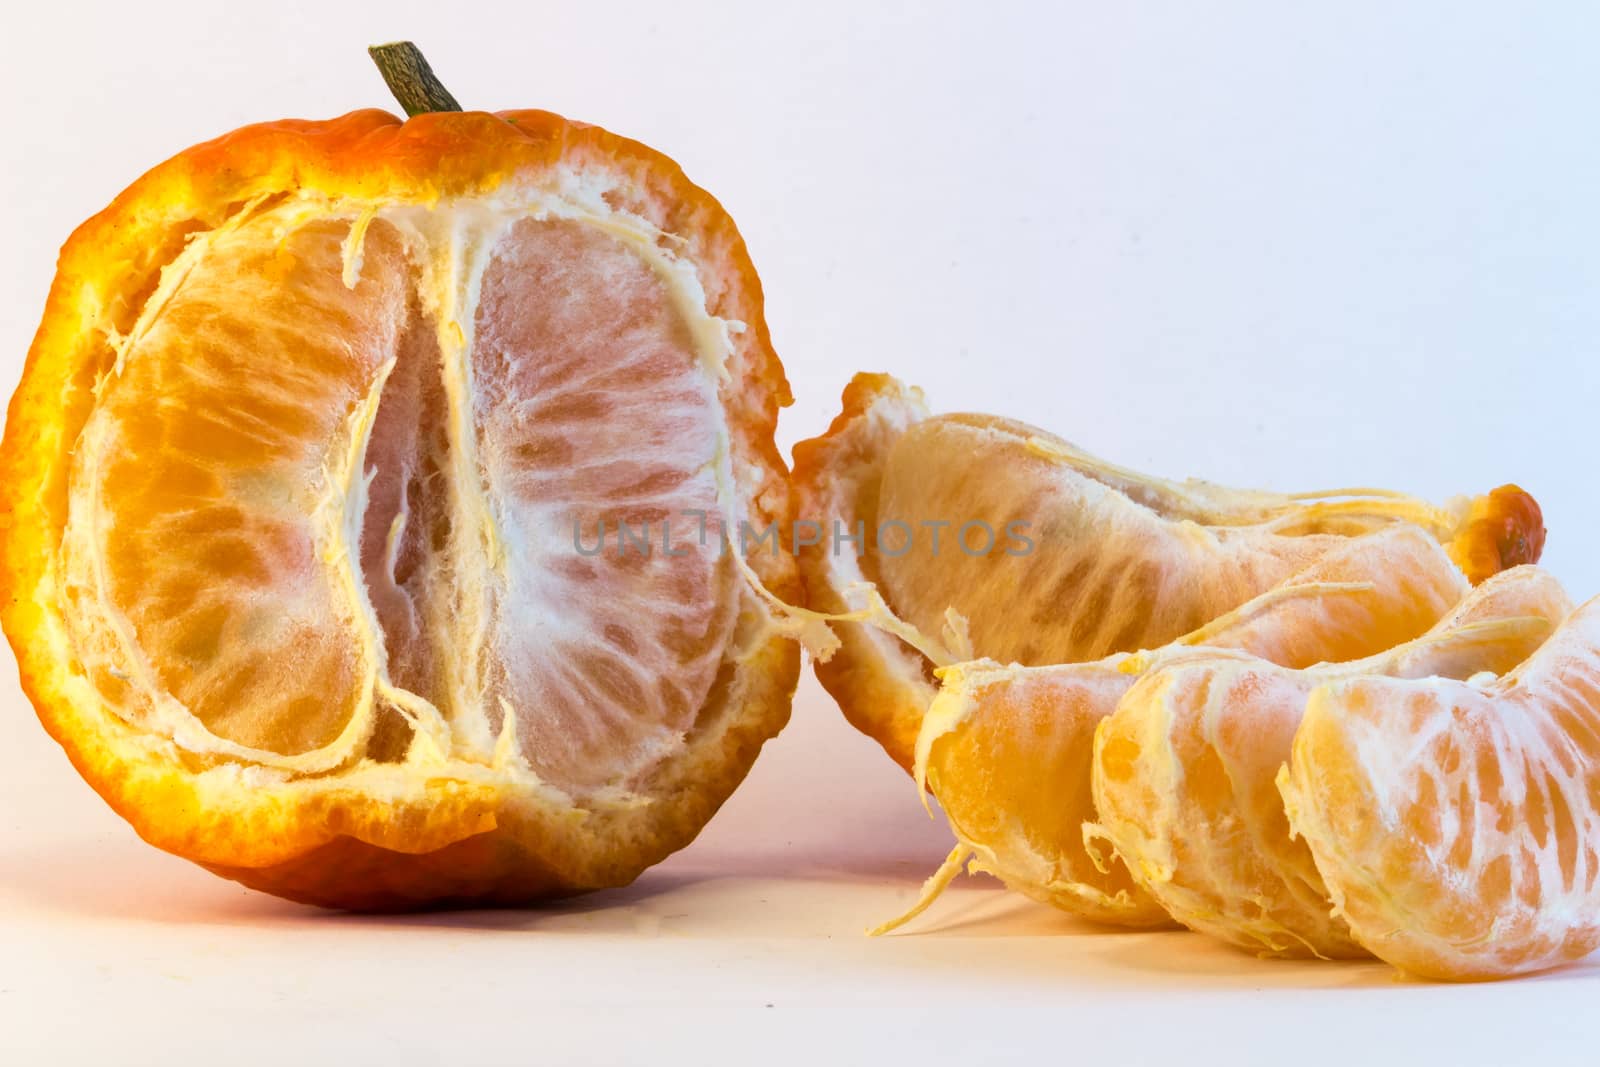 peeled tangerine on white background. Ideal for layout